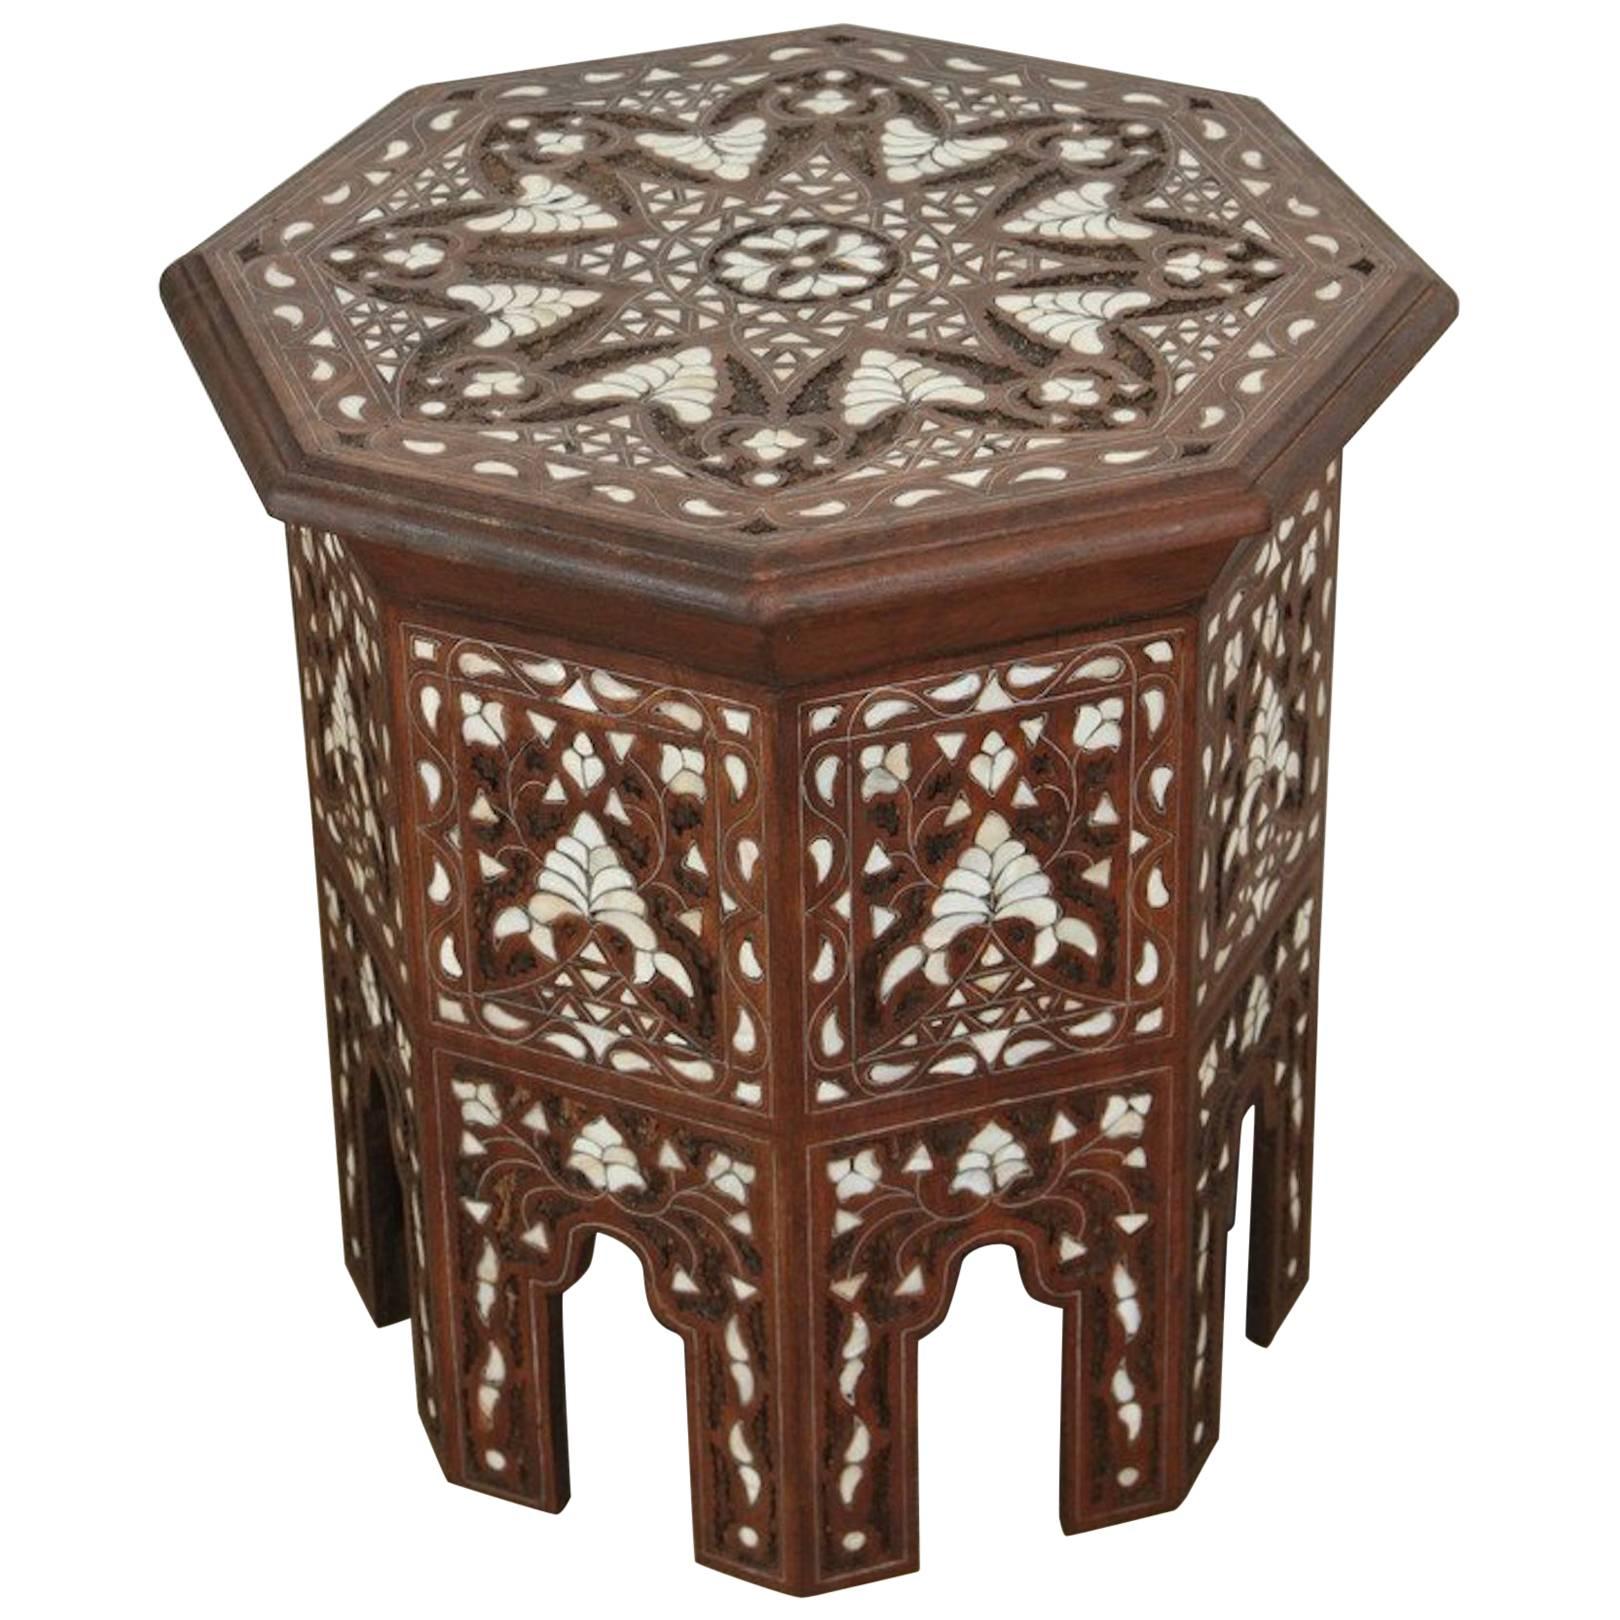 Syrian Mother-of-Pearl Inlaid Side Table